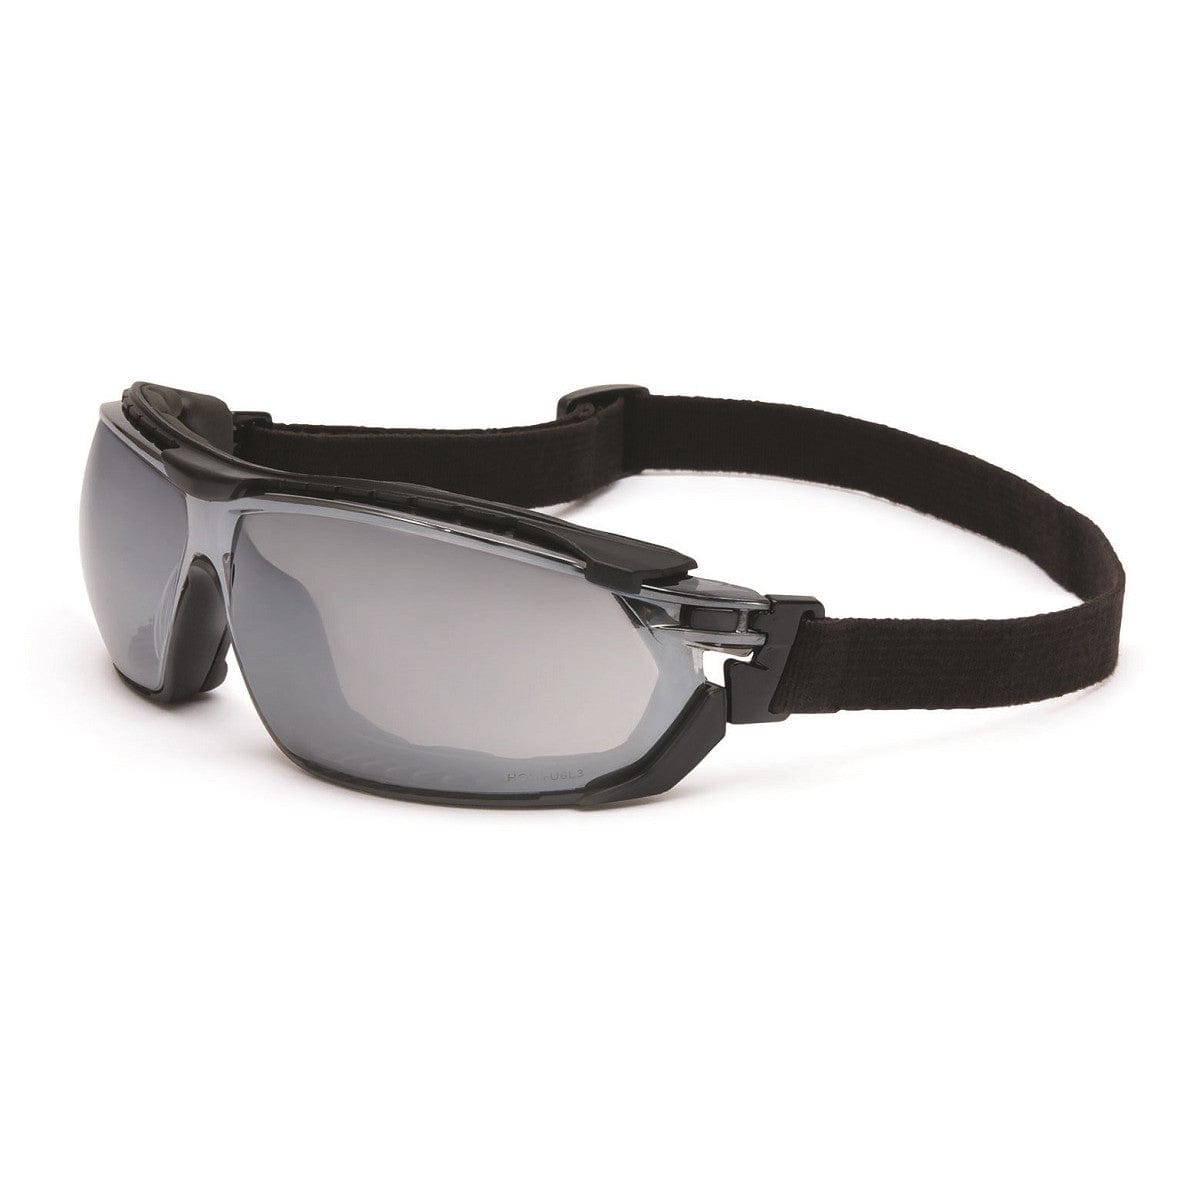 Uvex Tirade Safety Glasses with Indoor/Outdoor Anti-Fog Lens